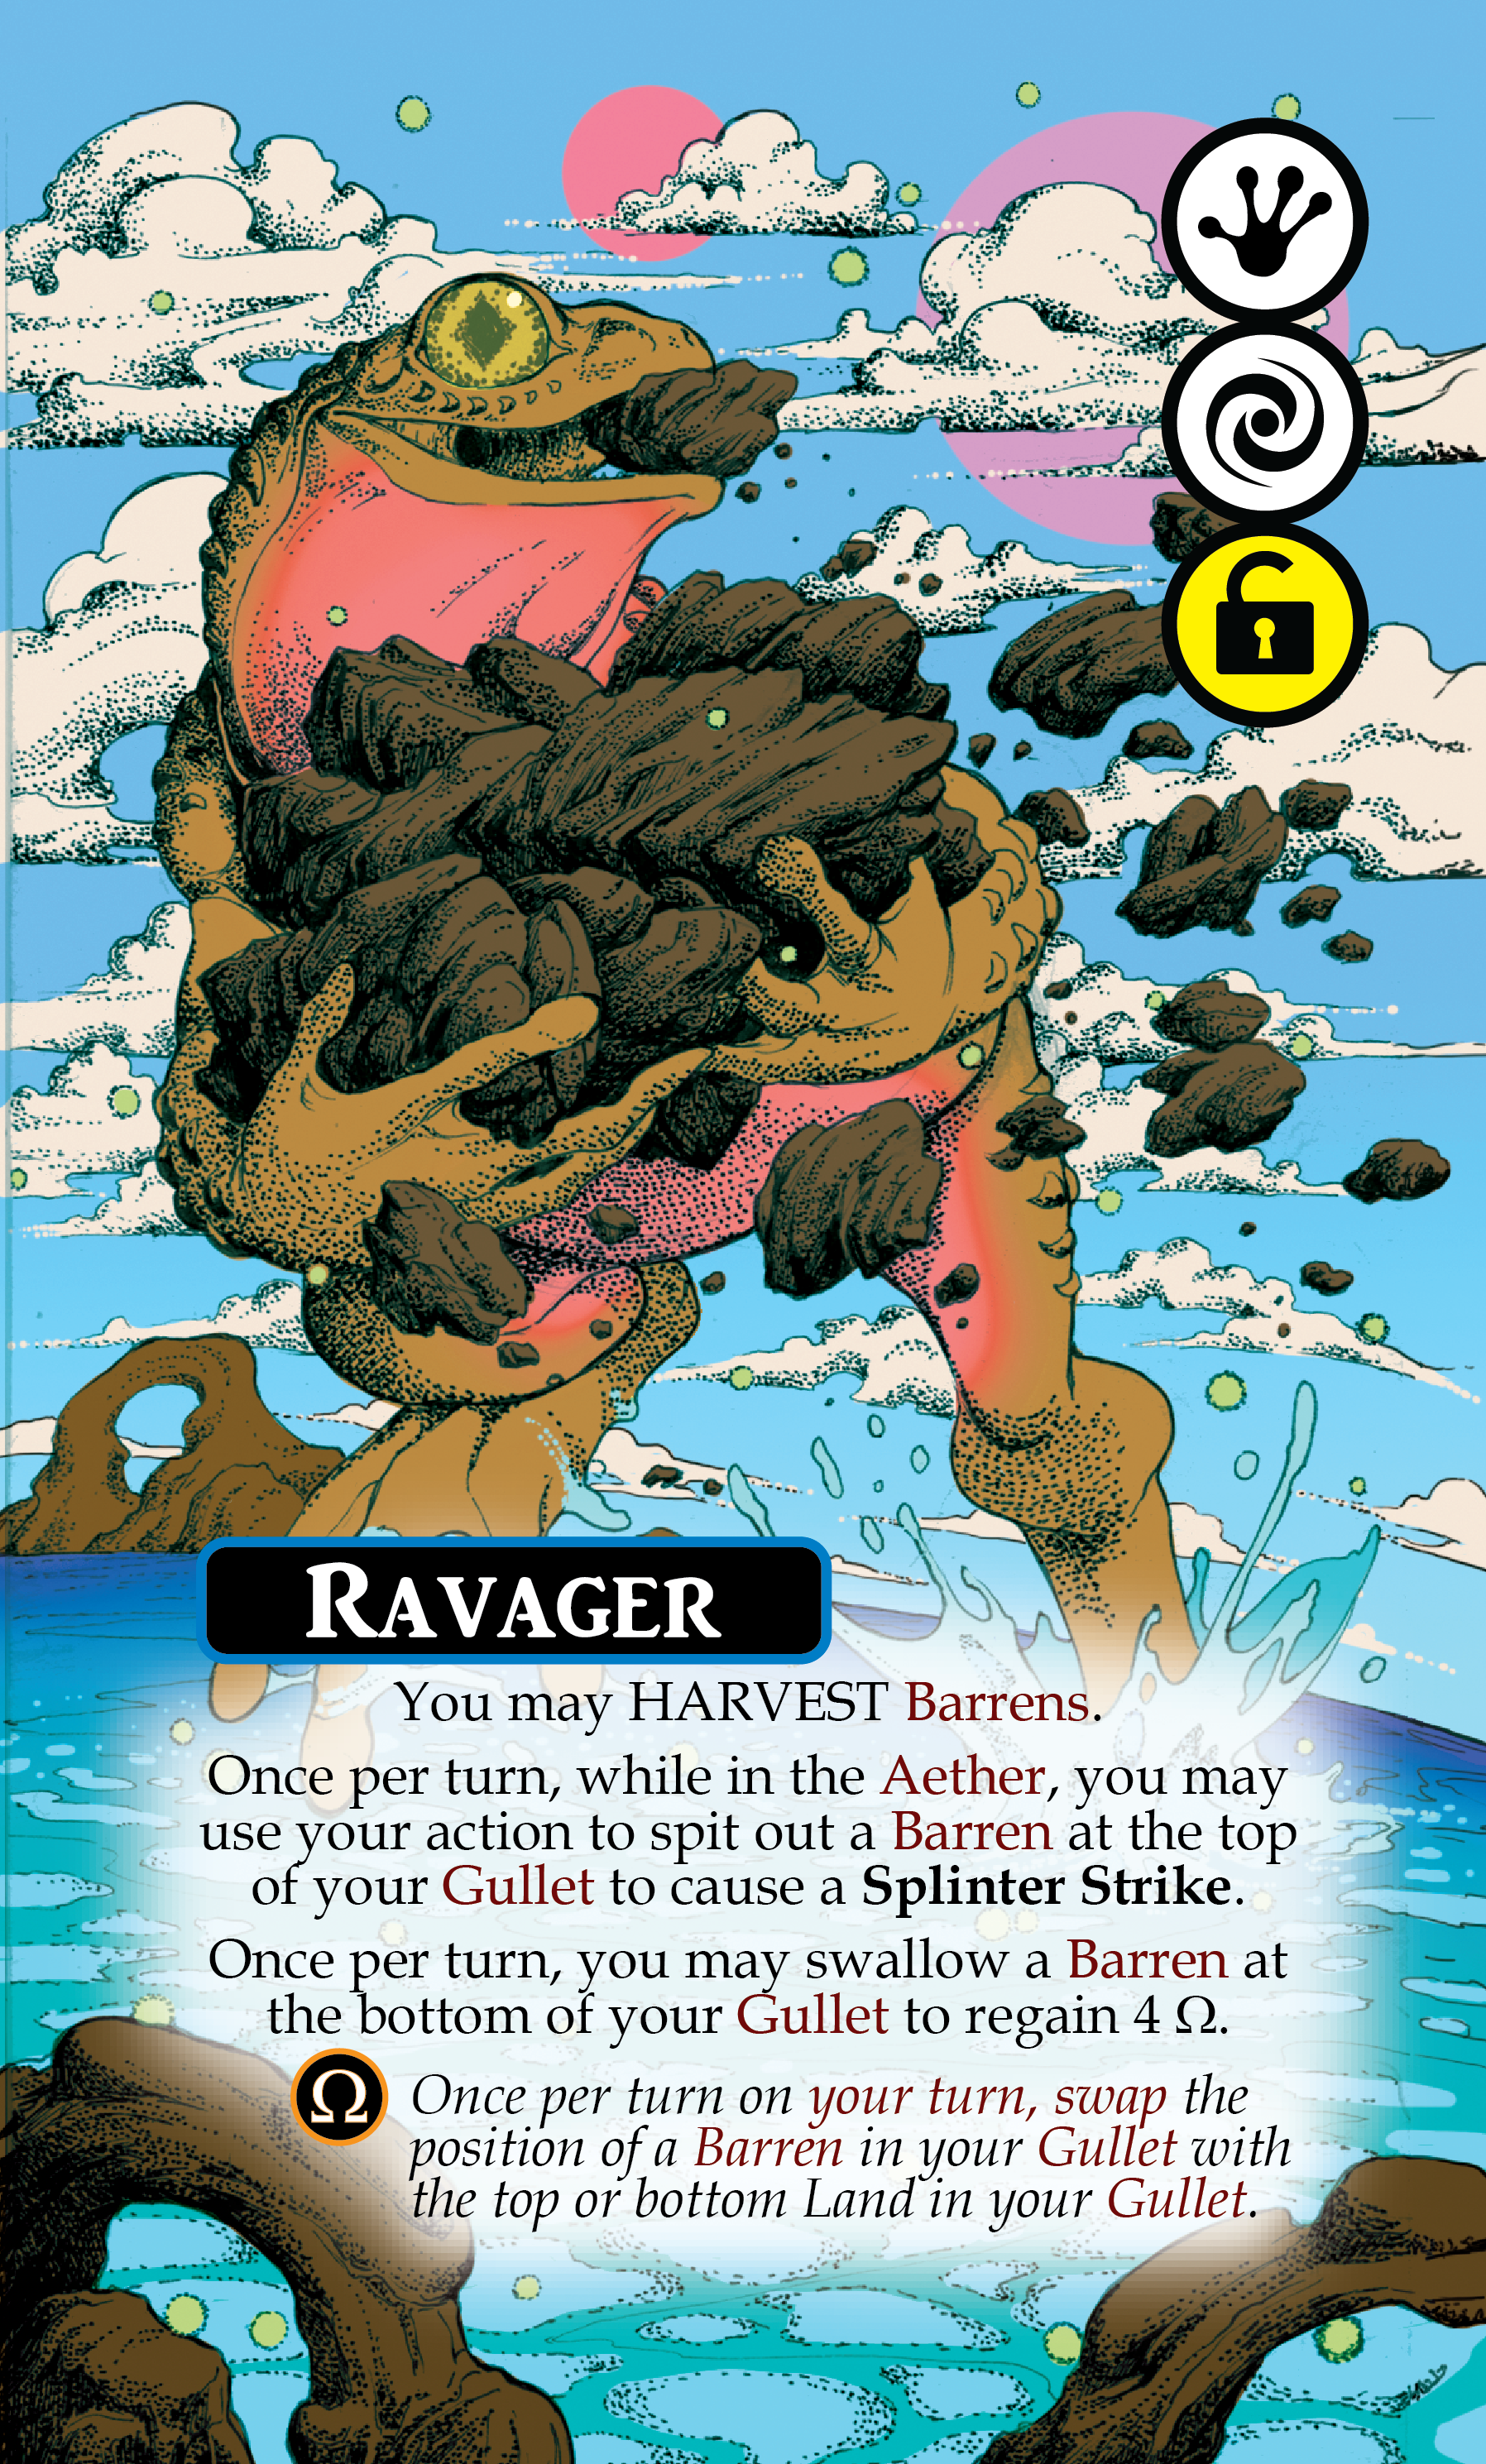 Ravager Card FINAL (4 Feb 2020) r2-01.png